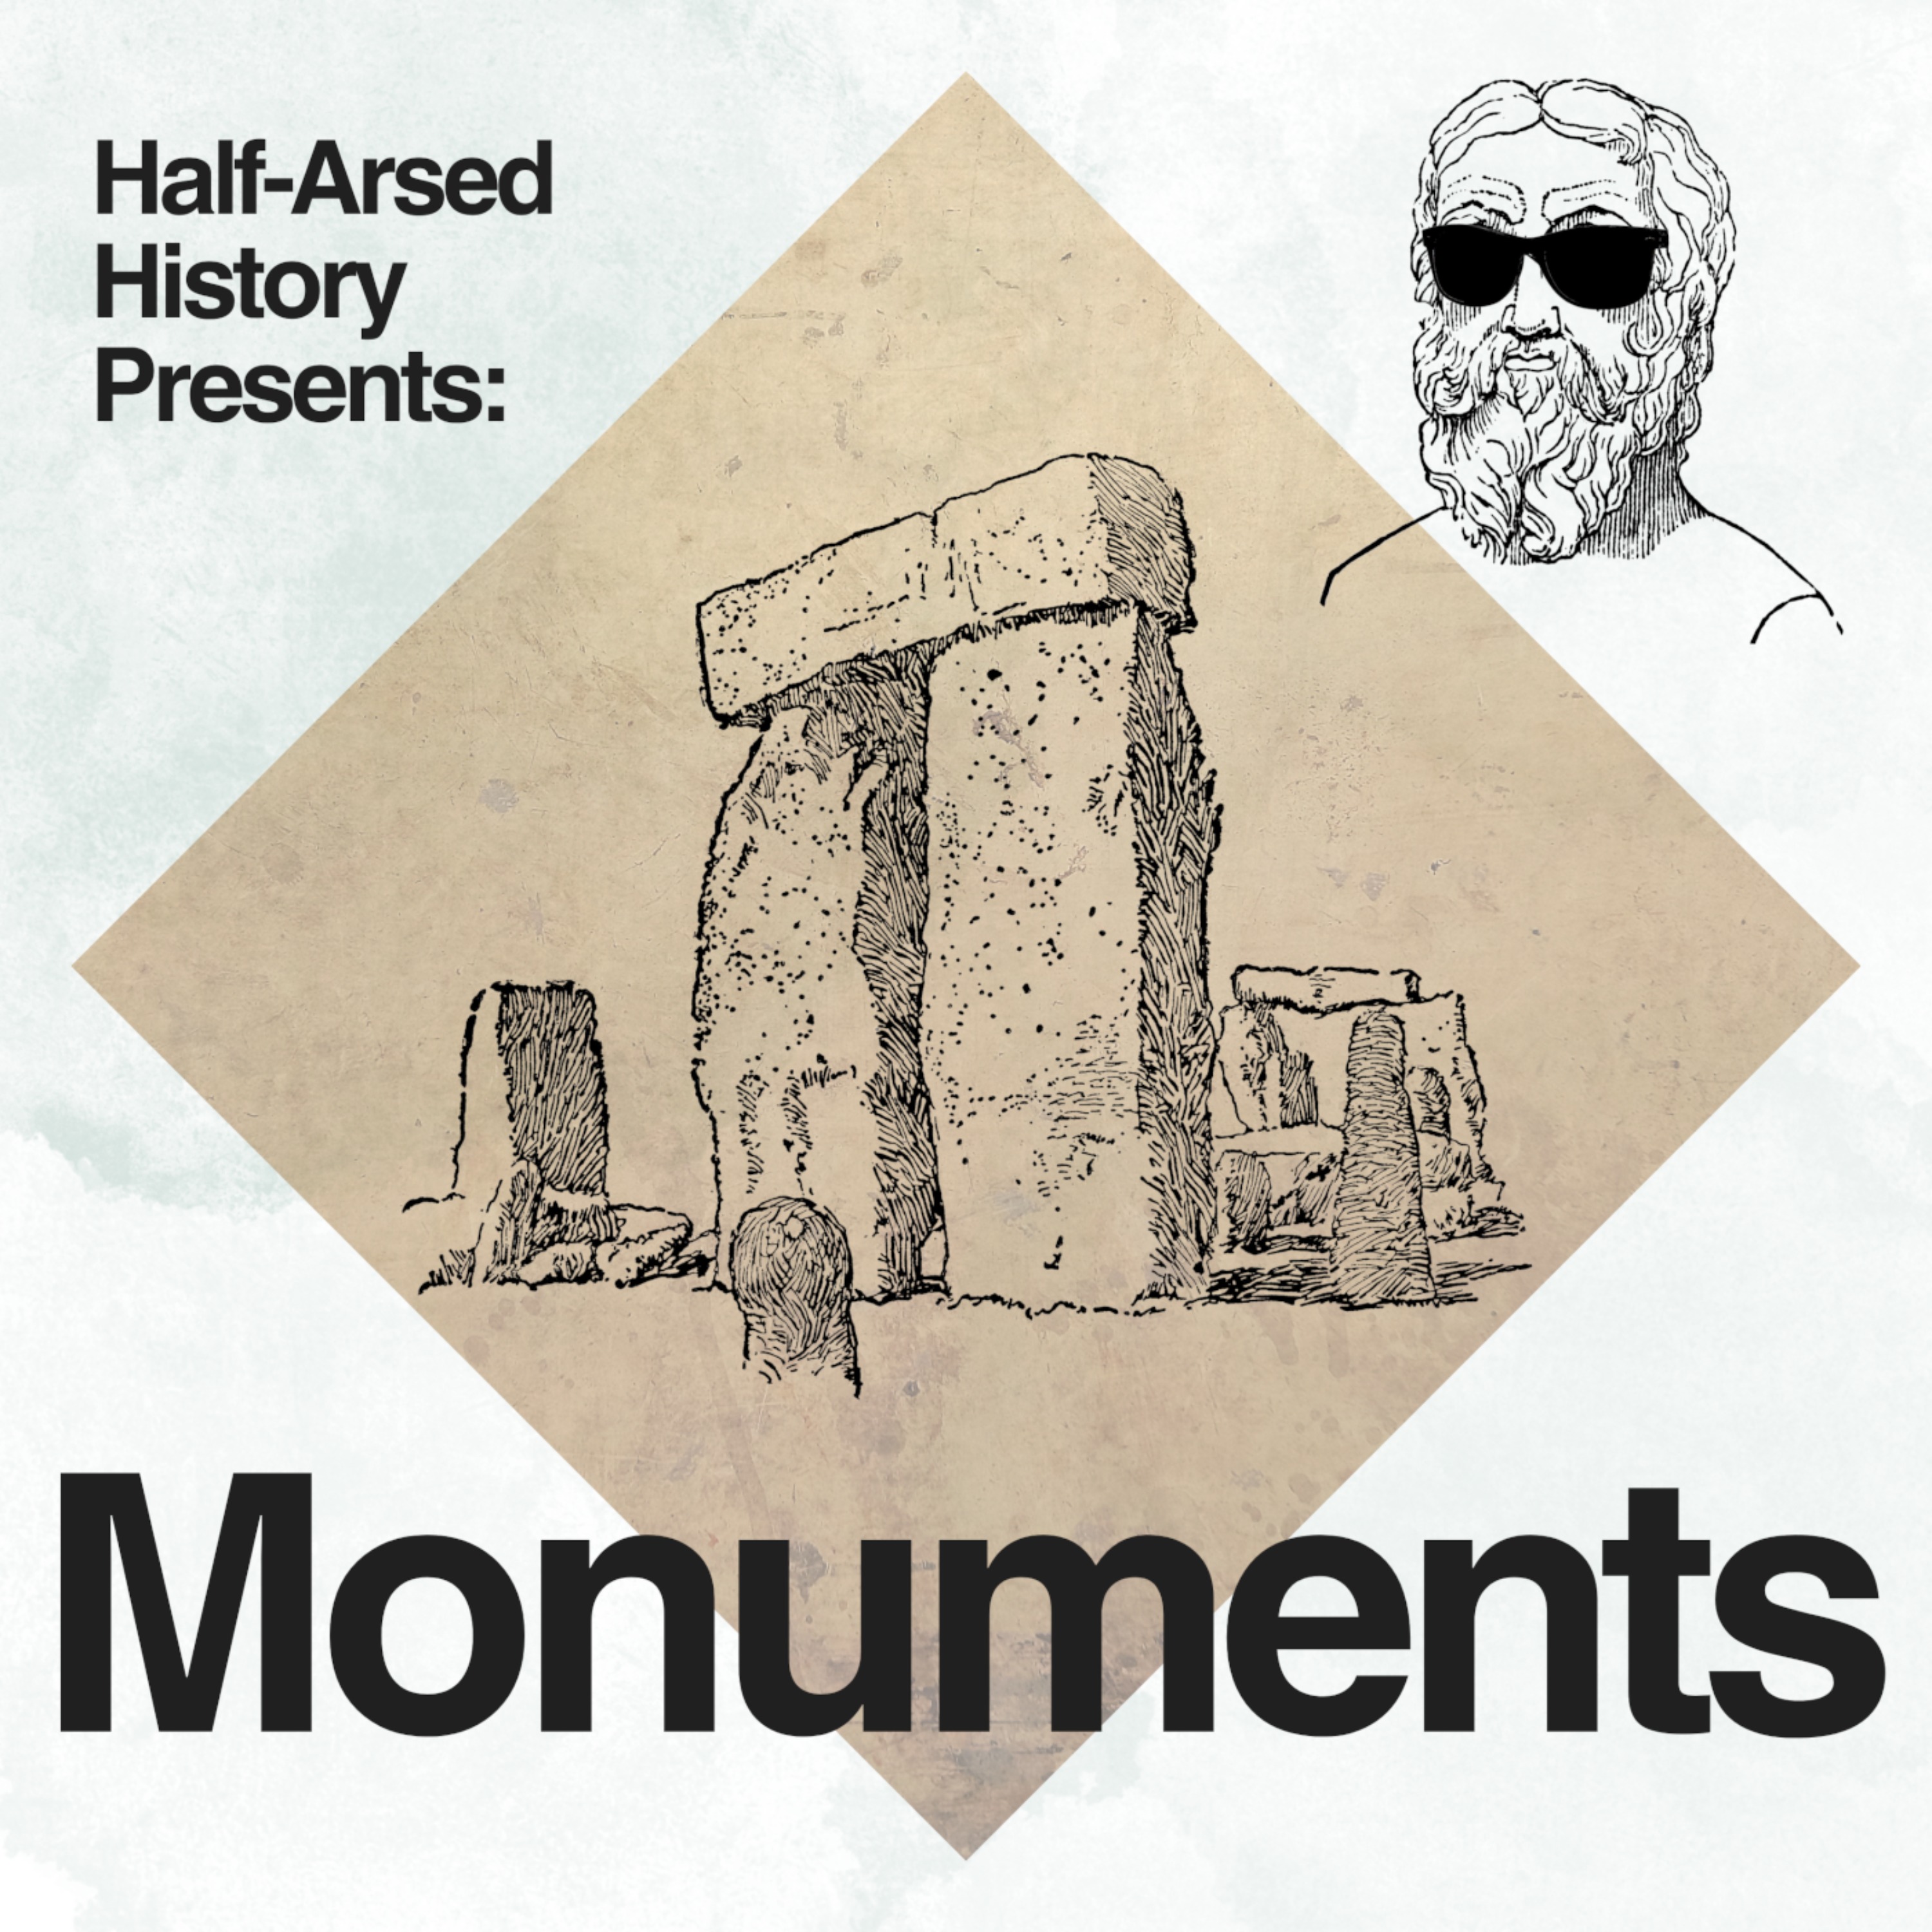 Monuments Episode 13: The Dome of the Rock